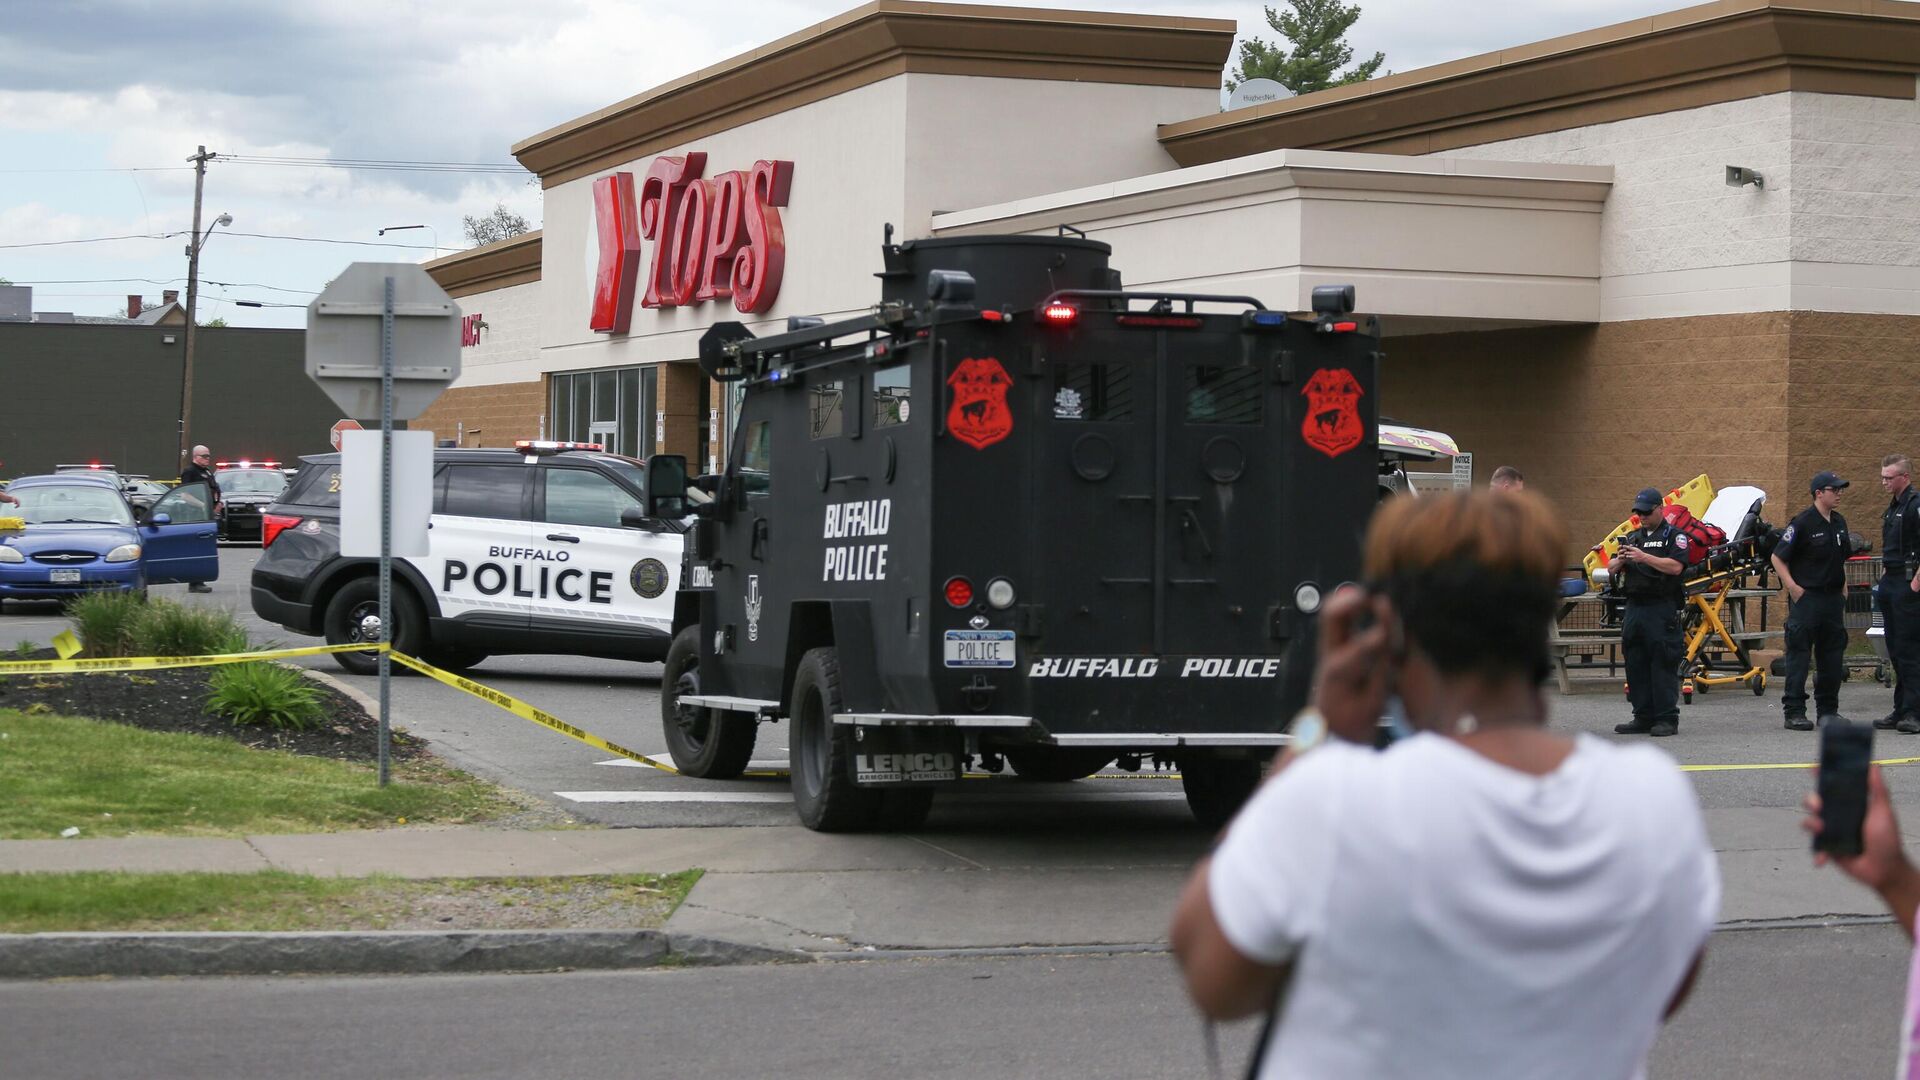 A crowd gathers as police investigate after a shooting at a supermarket on Saturday, May 14, 2022, in Buffalo, N.Y. Multiple people were shot  at the Tops Friendly Market.  Police have notified the public that the alleged shooter was in custody.  - Sputnik International, 1920, 14.05.2022